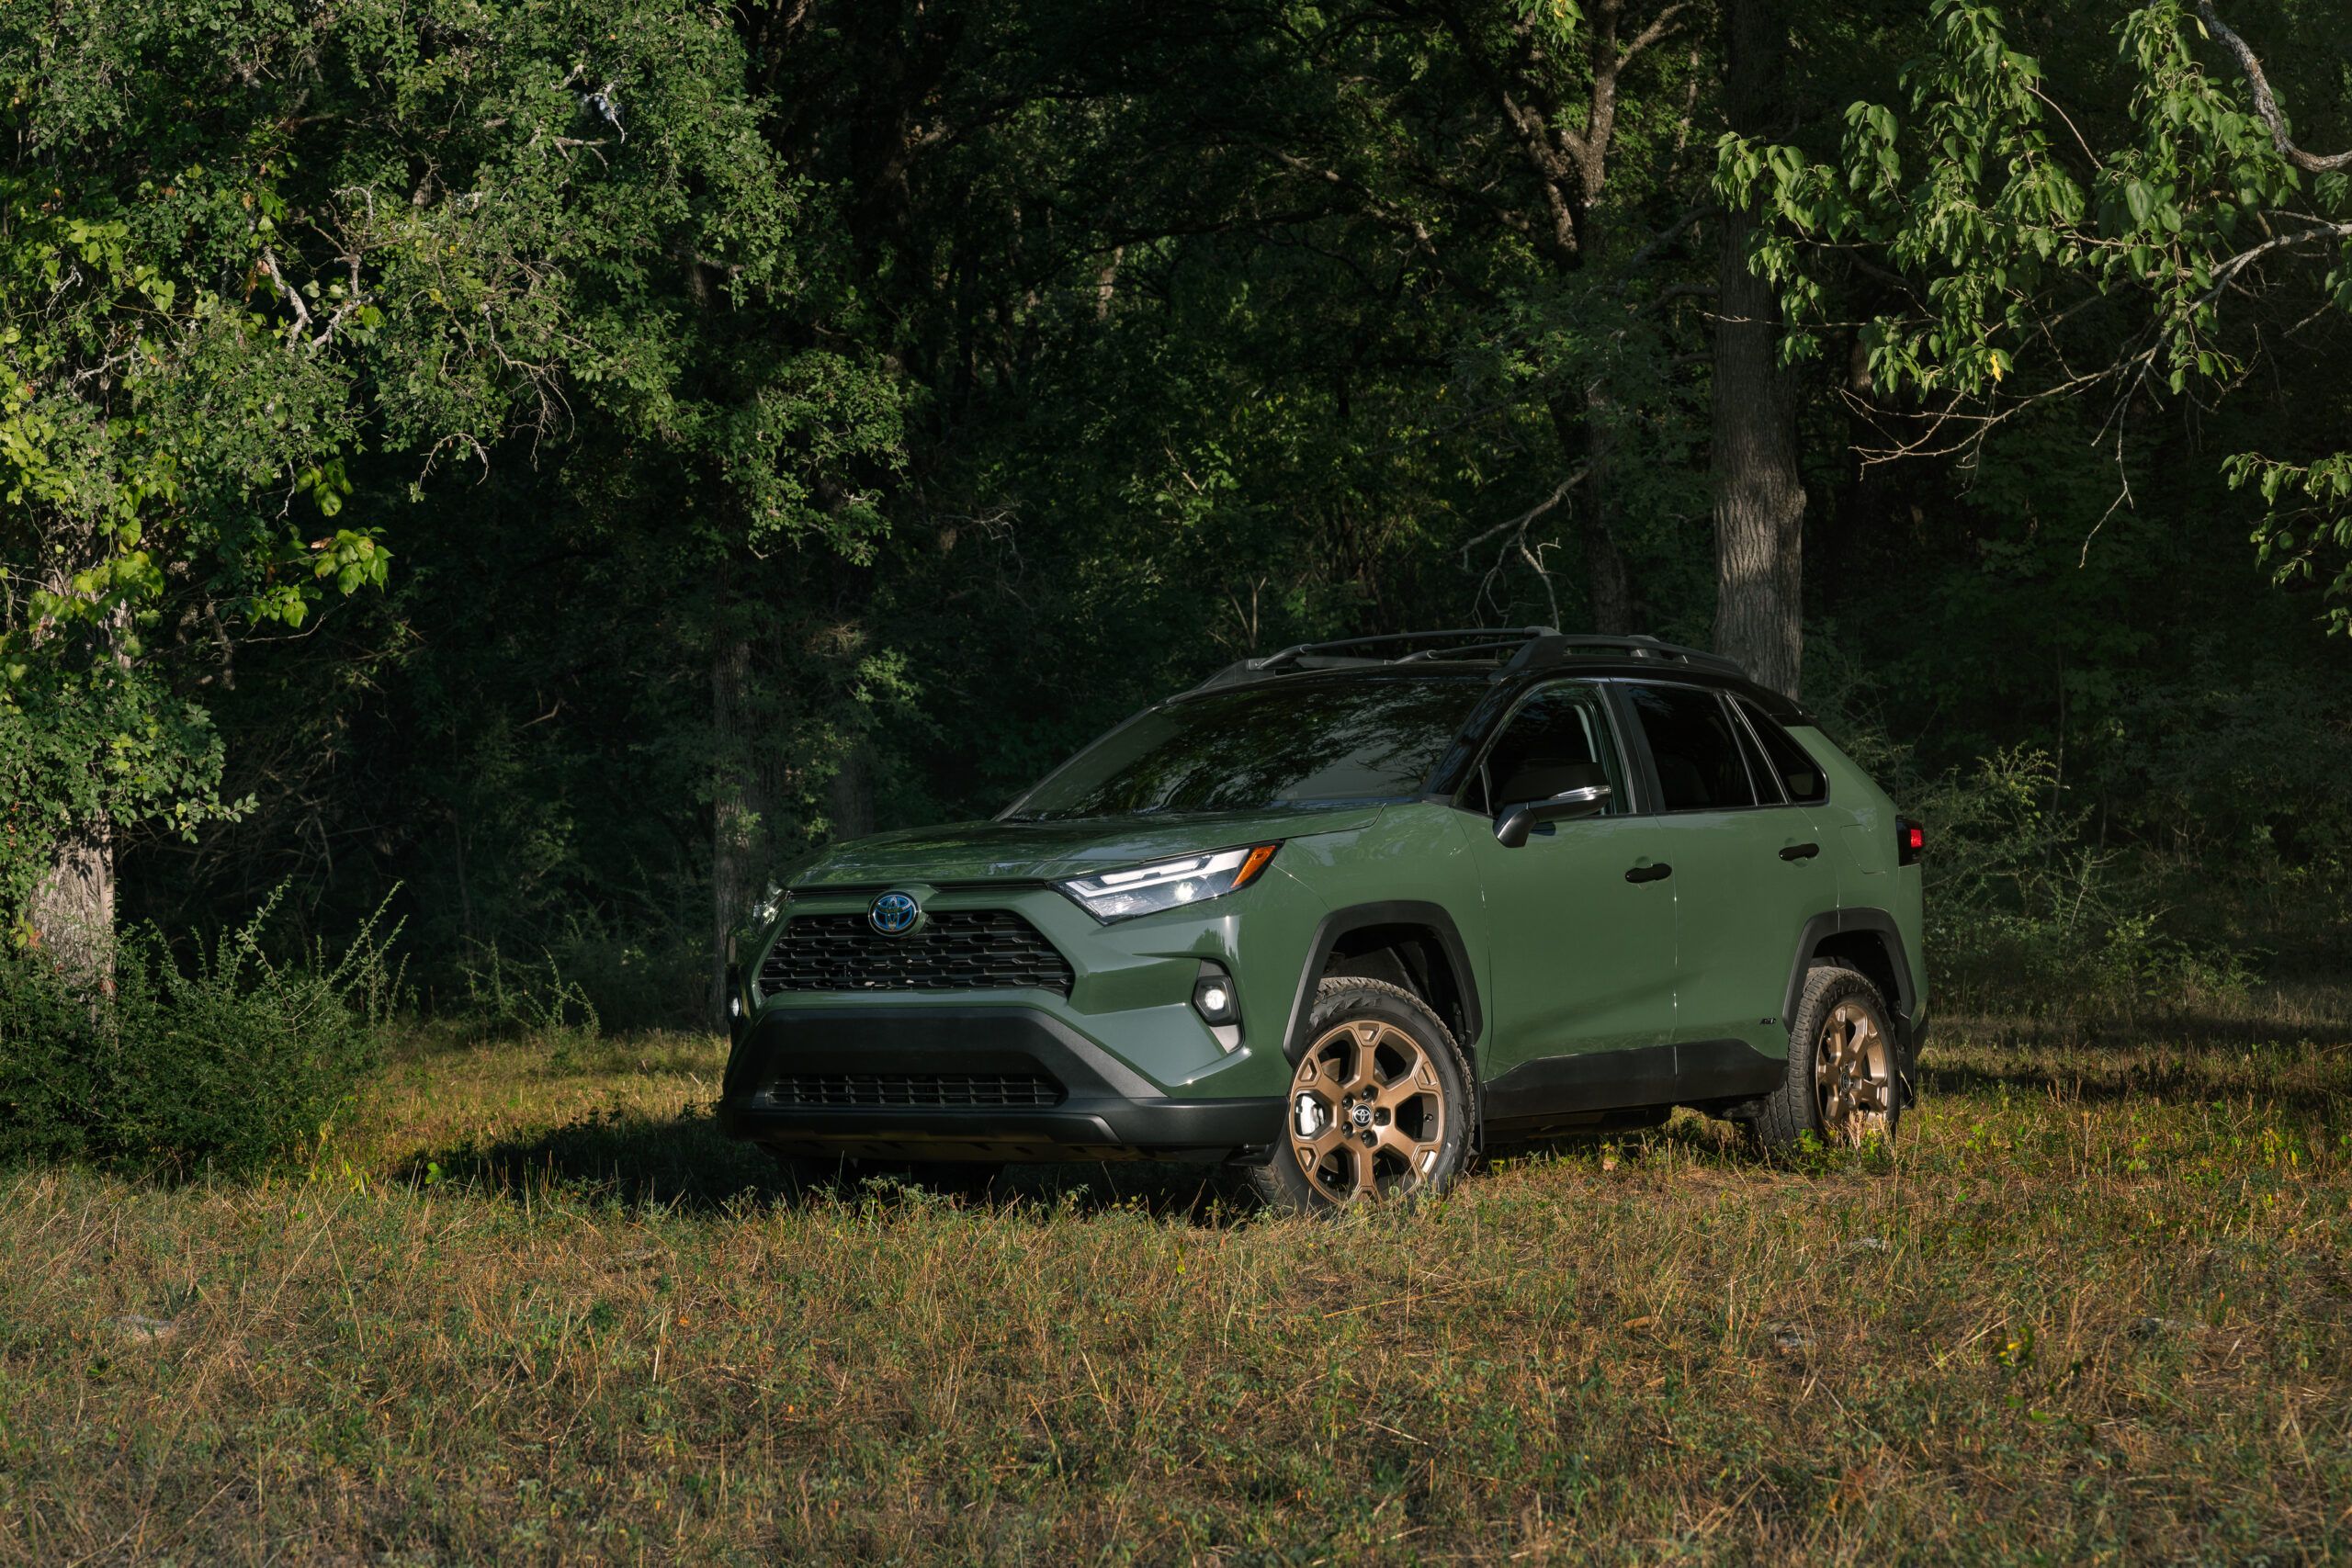 2021 Toyota RAV4 Review, Pricing, and Specs